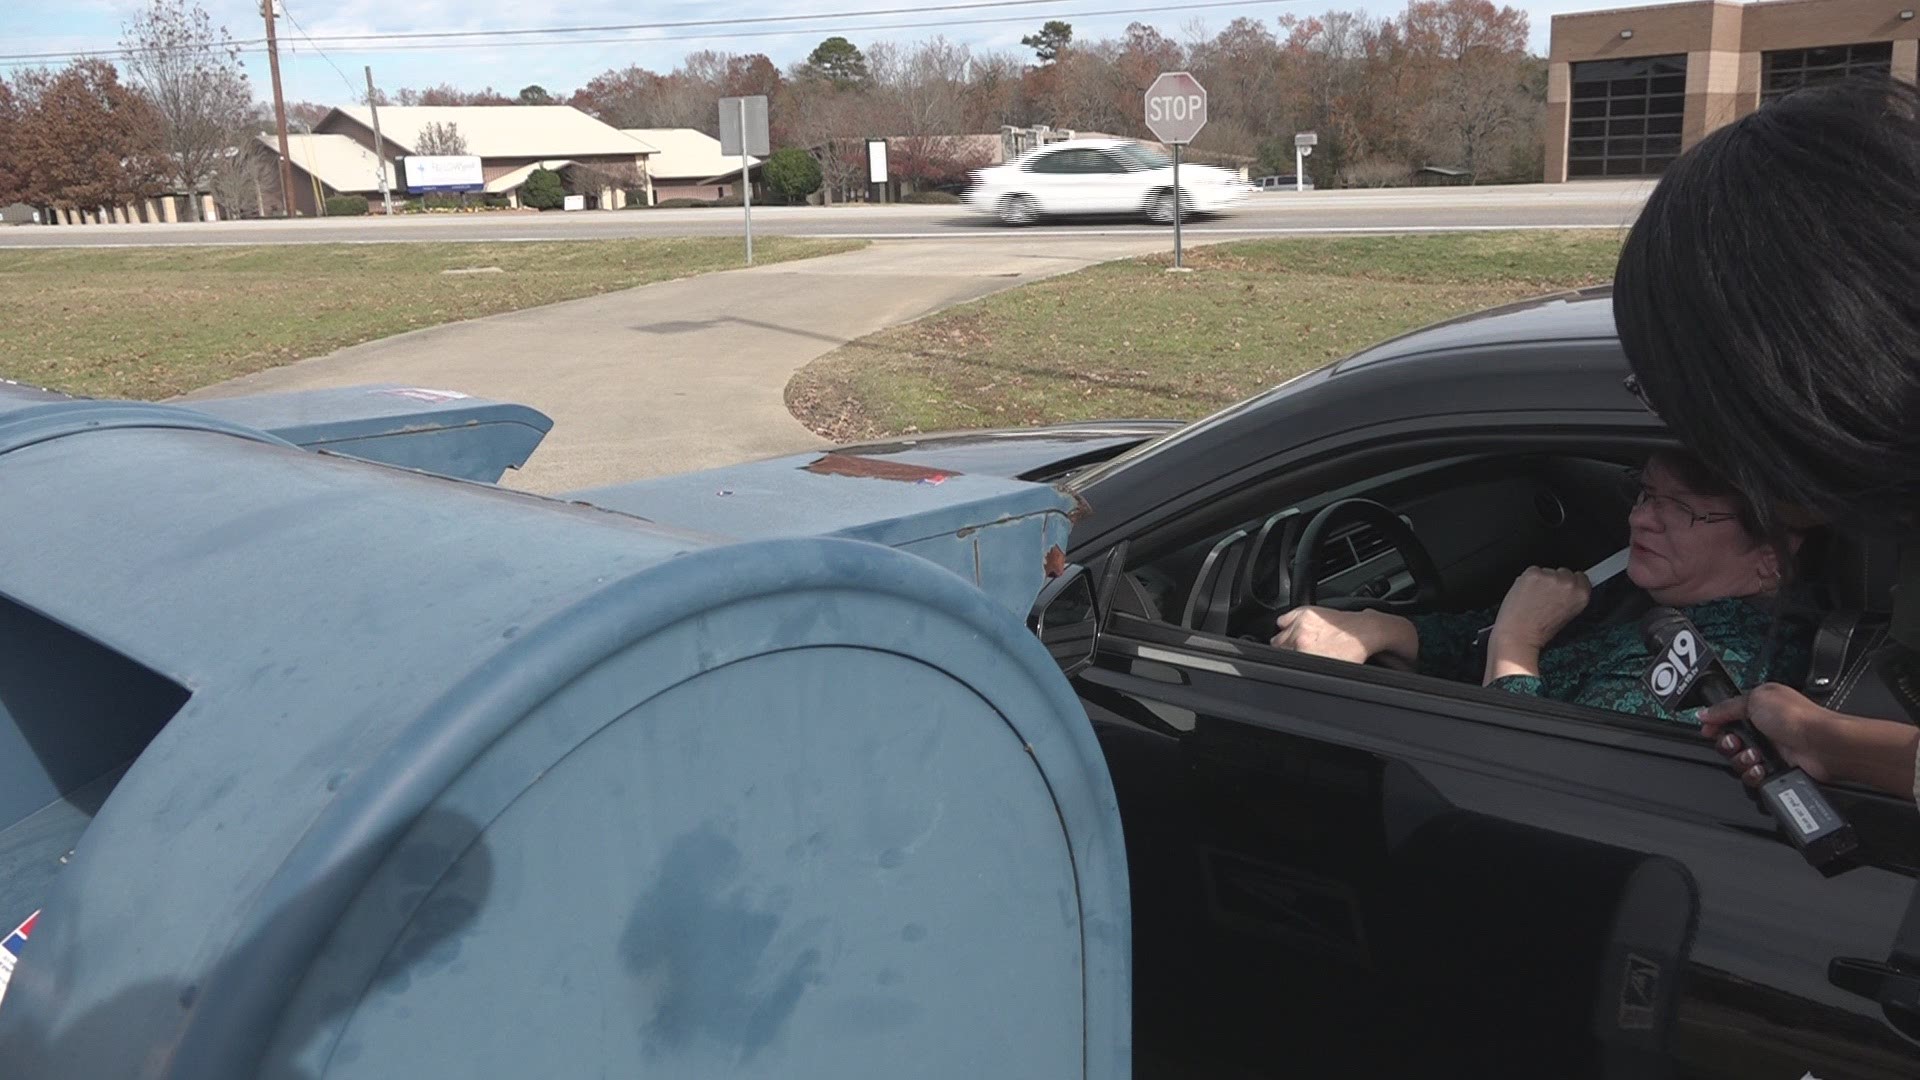 MORE MAIL THEFTS IN EAST TEXAS